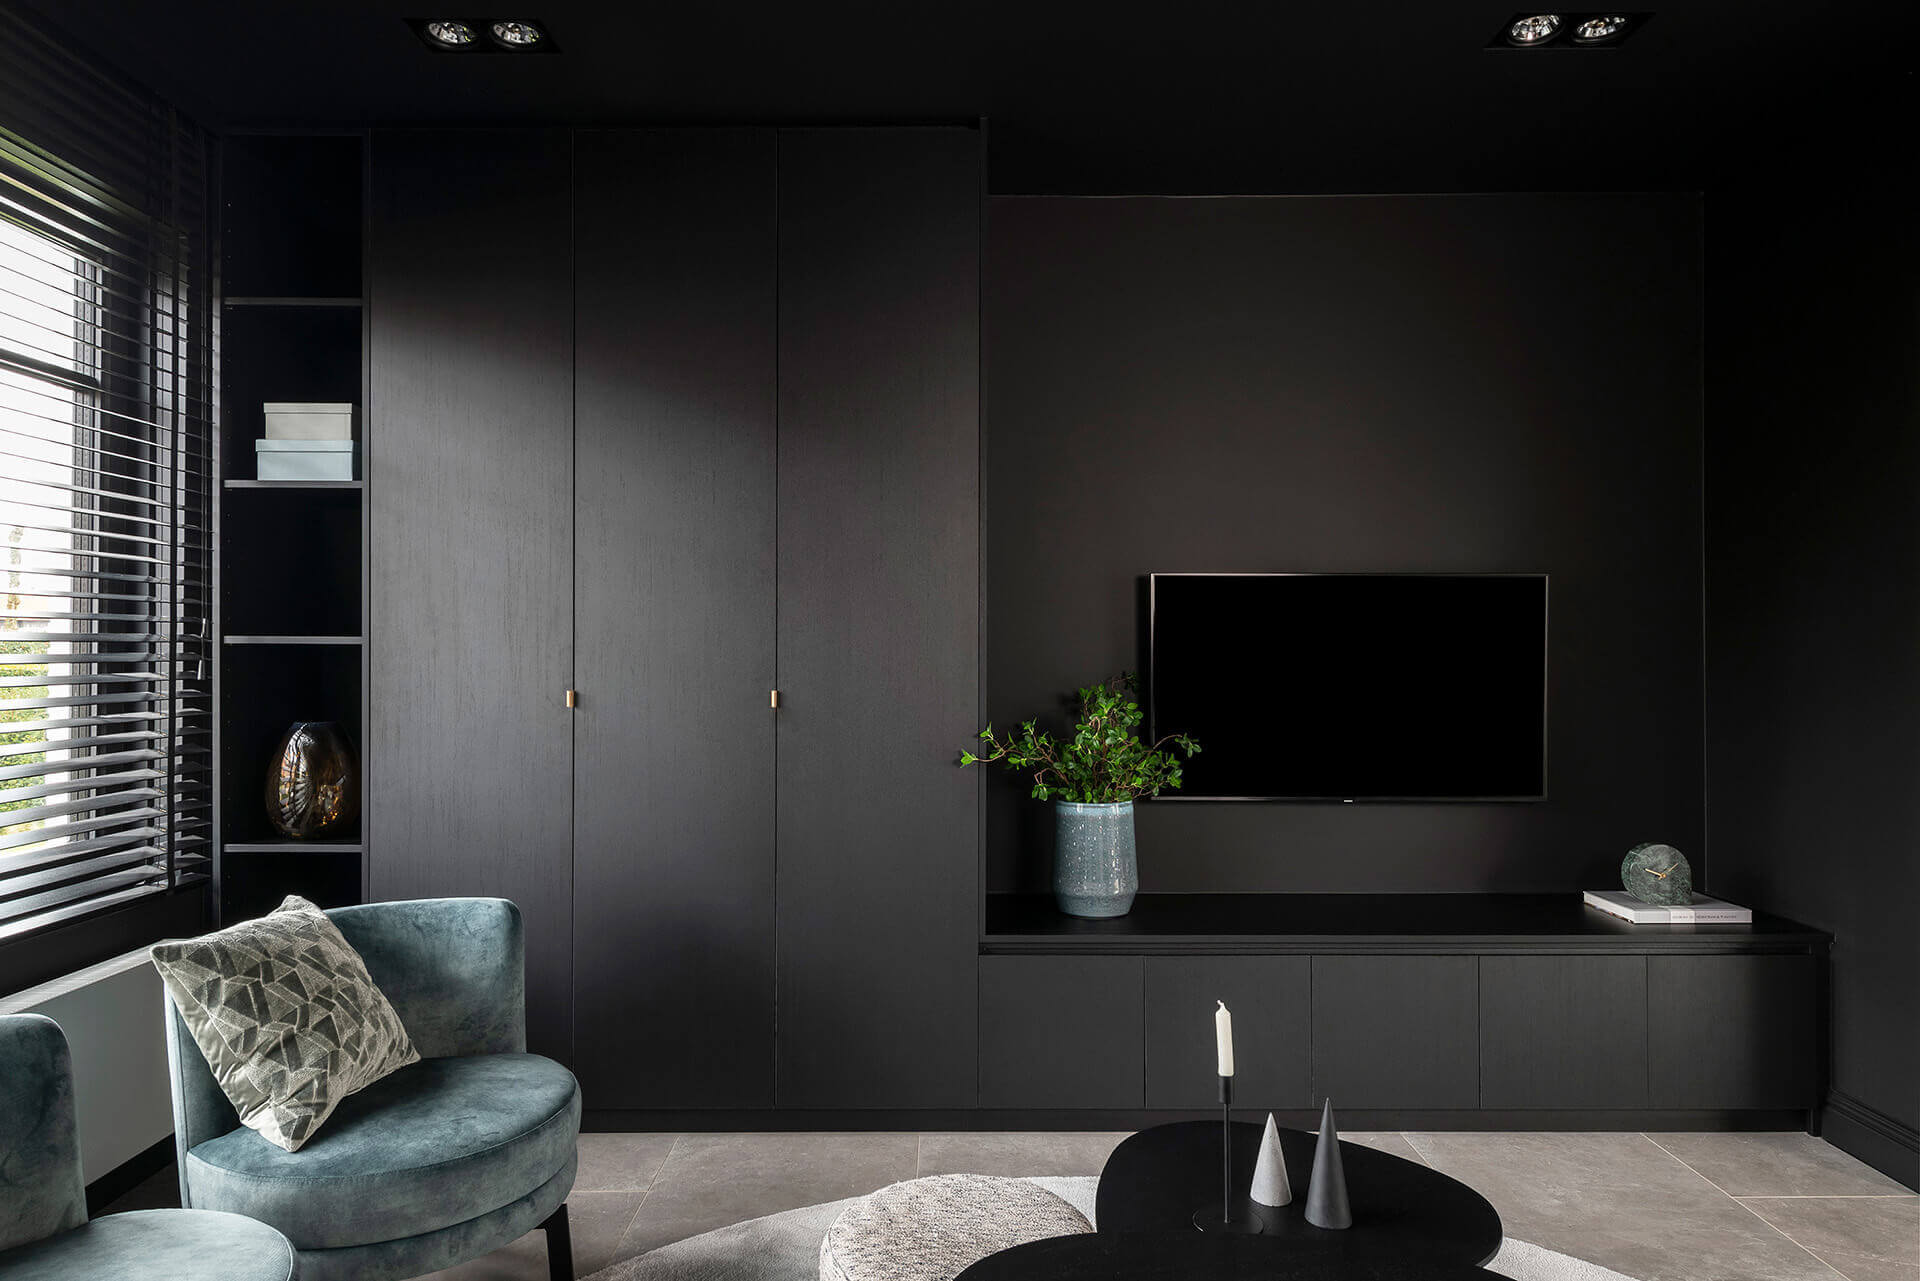 Wall unit combination, consisting of 2 tall storage cabinets and a chest of drawers in the middle by Maatkasten Online